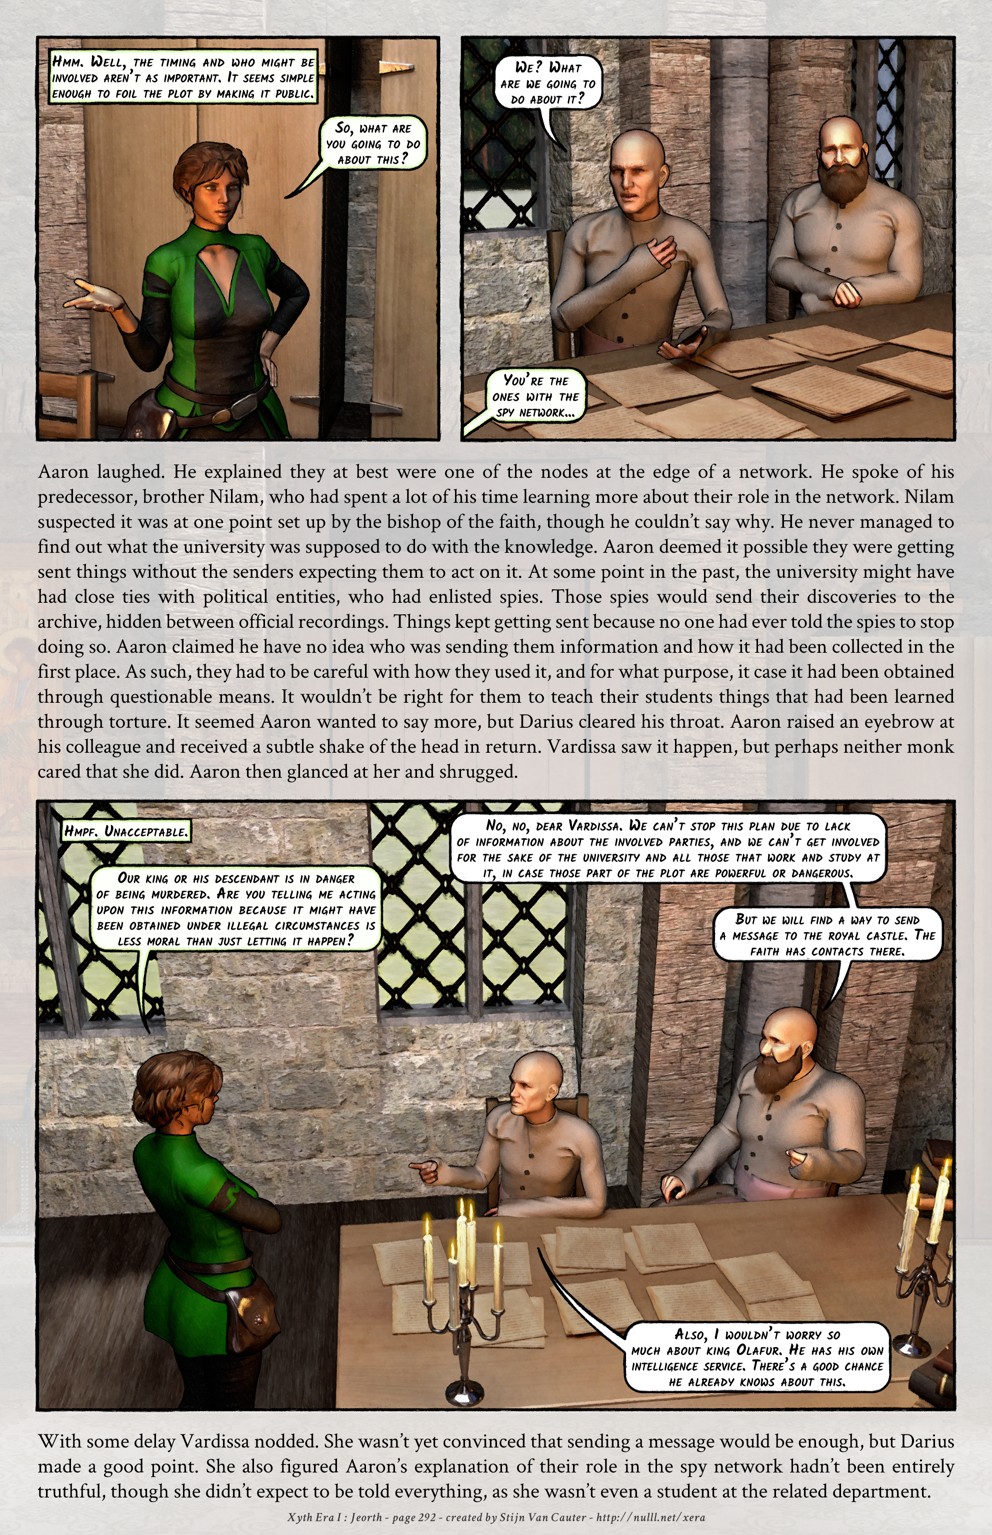 page 8/8